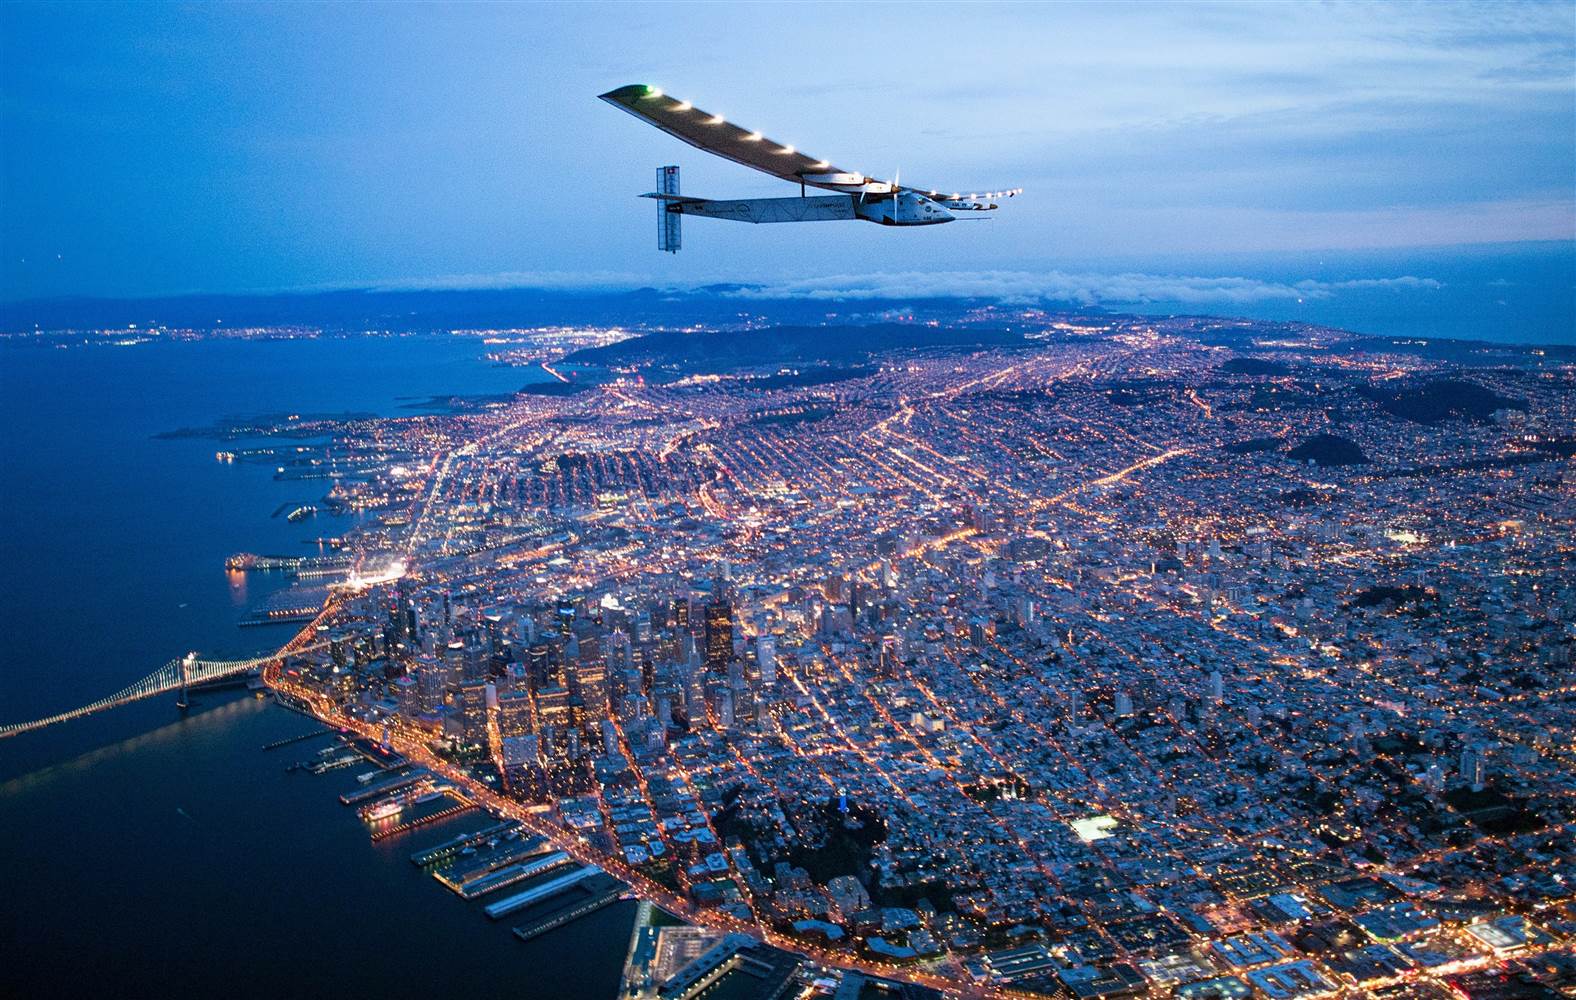 Solar-powered plane finishes flight over Pacific